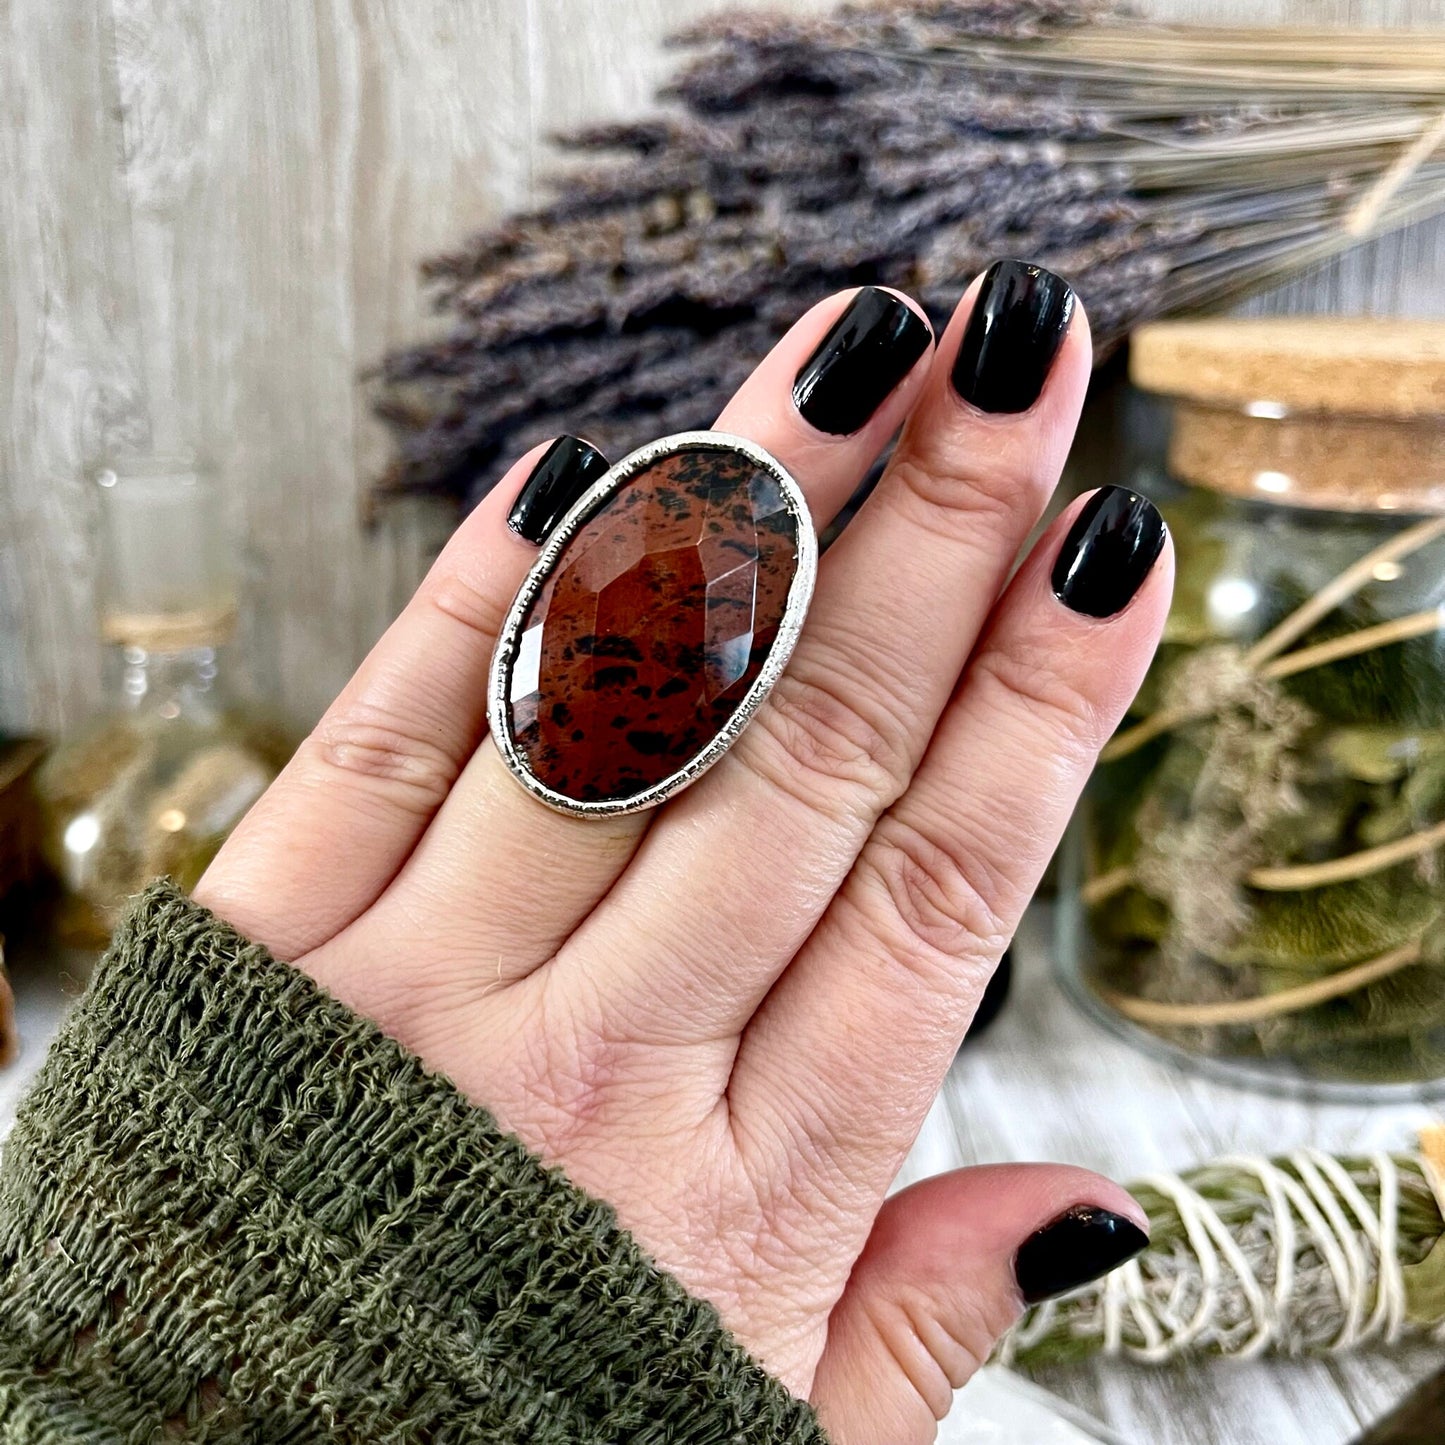 Big Silver Ring, Big Stone Ring, boho jewelry, crystal healing, Electroformed Ring, Etsy ID: 1560809191, FOXLARK- RINGS, gypsy ring, Hippie Ring, Jewelry, Large Crystal Ring, Mahogany Obsidian, Obsidian ring, raw crystal ring, raw quartz crystal, Rings, S